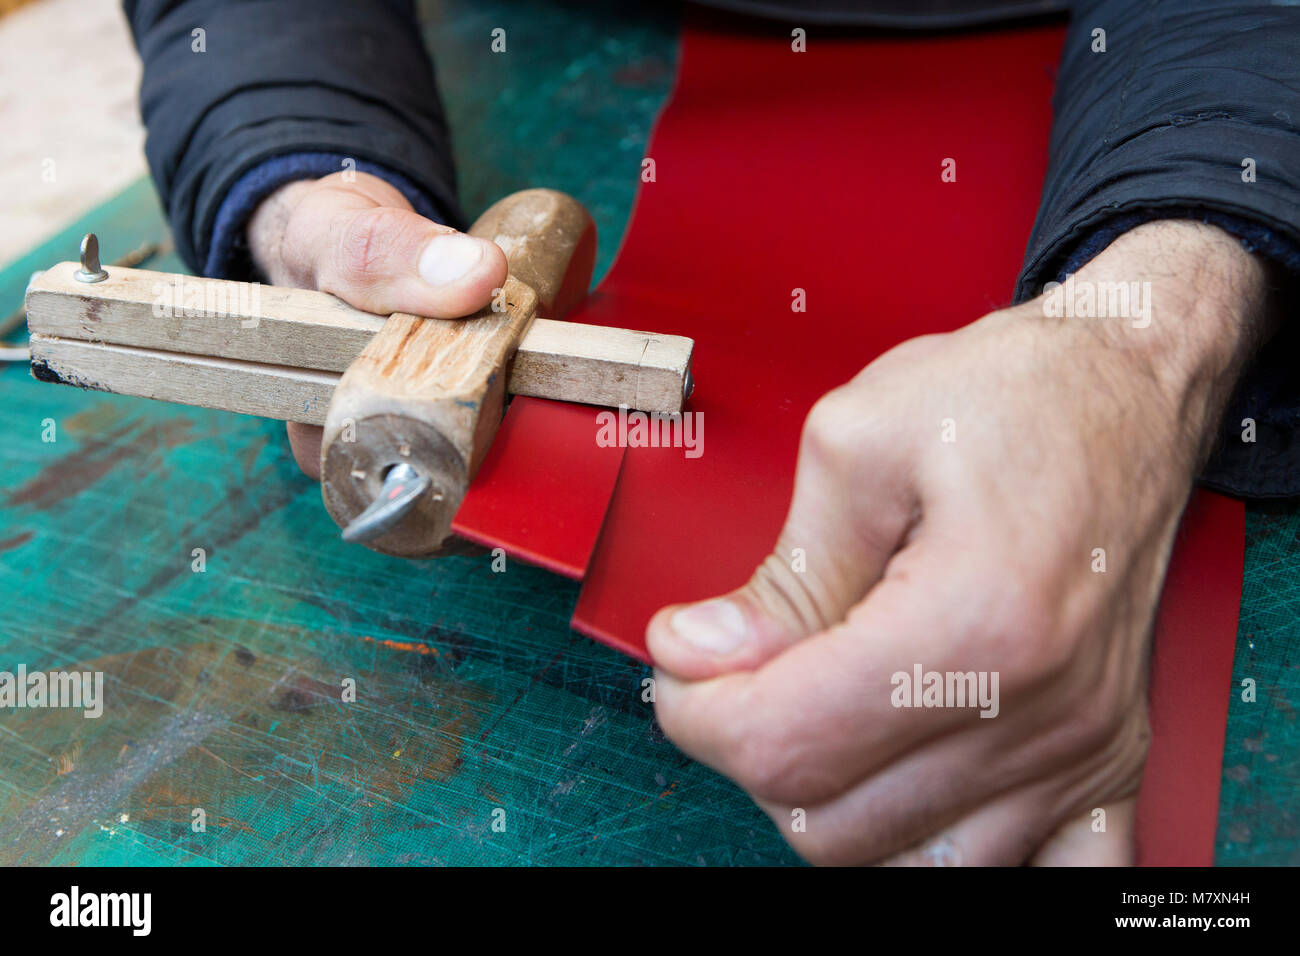 Artisan leather worker making a belt. Stock Photo